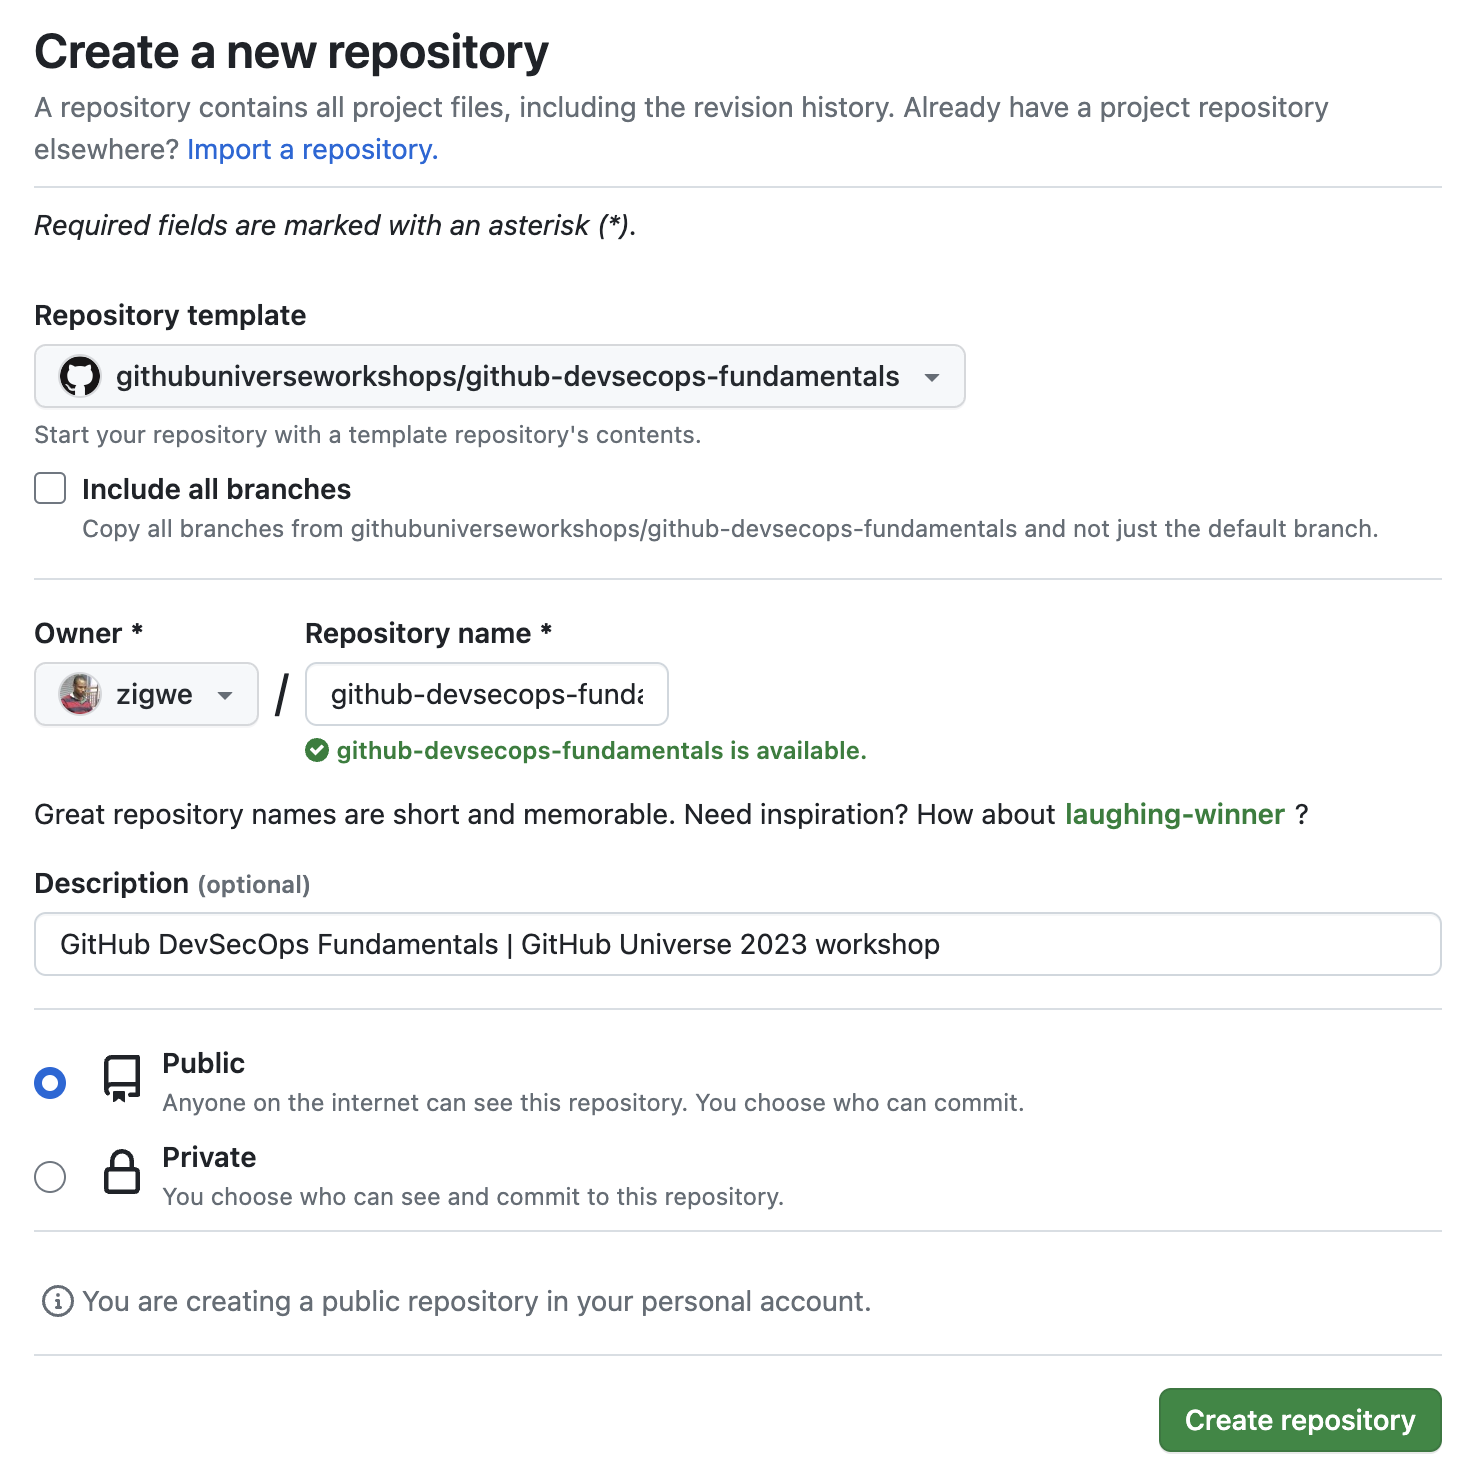 Create a new repository from a template